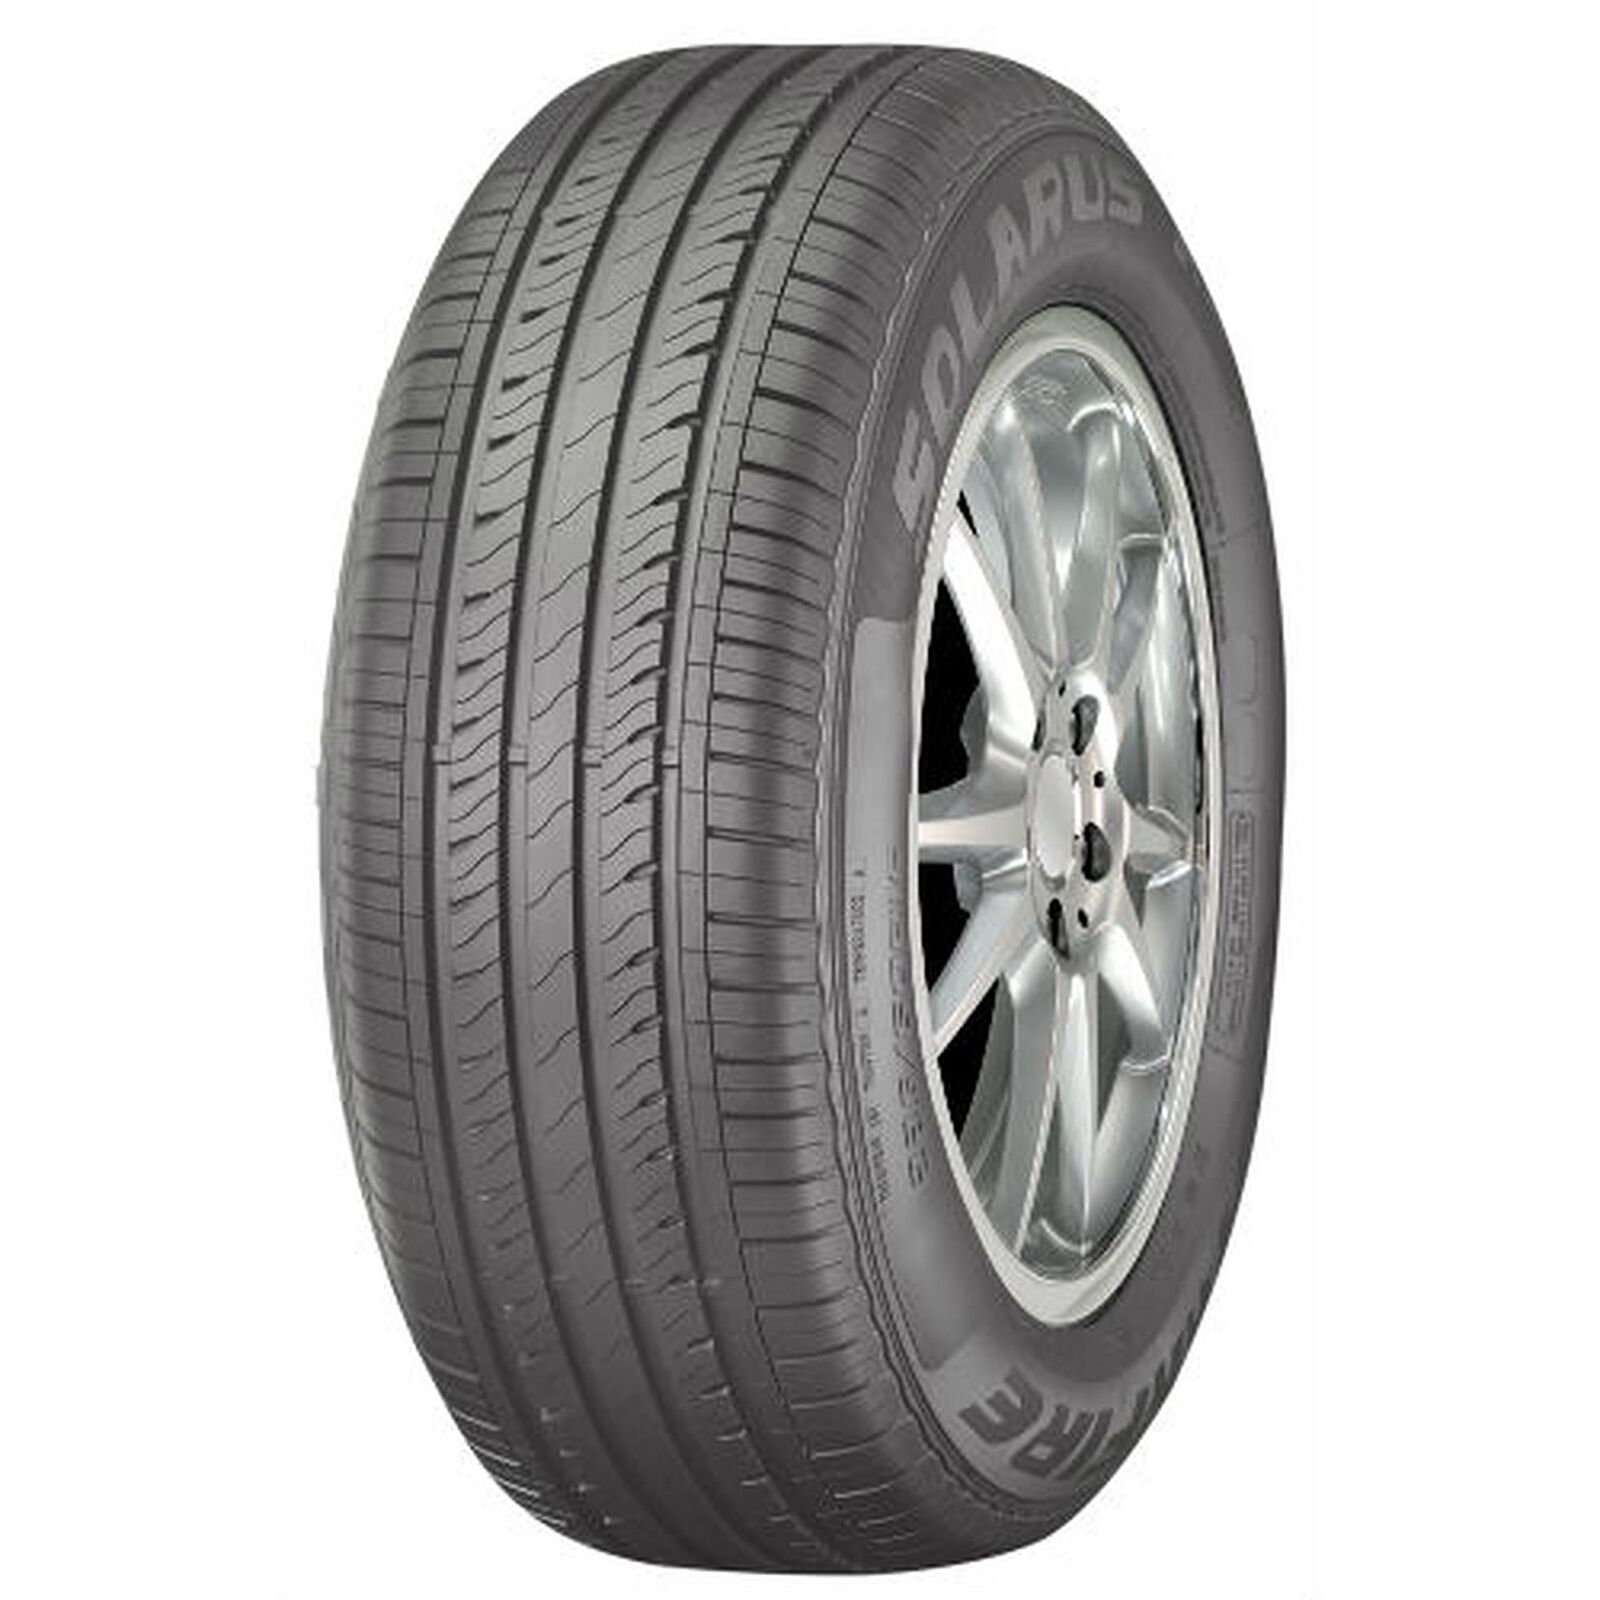 1 New Starfire Solarus As  - P195/65r15 Tires 1956515 195 65 15